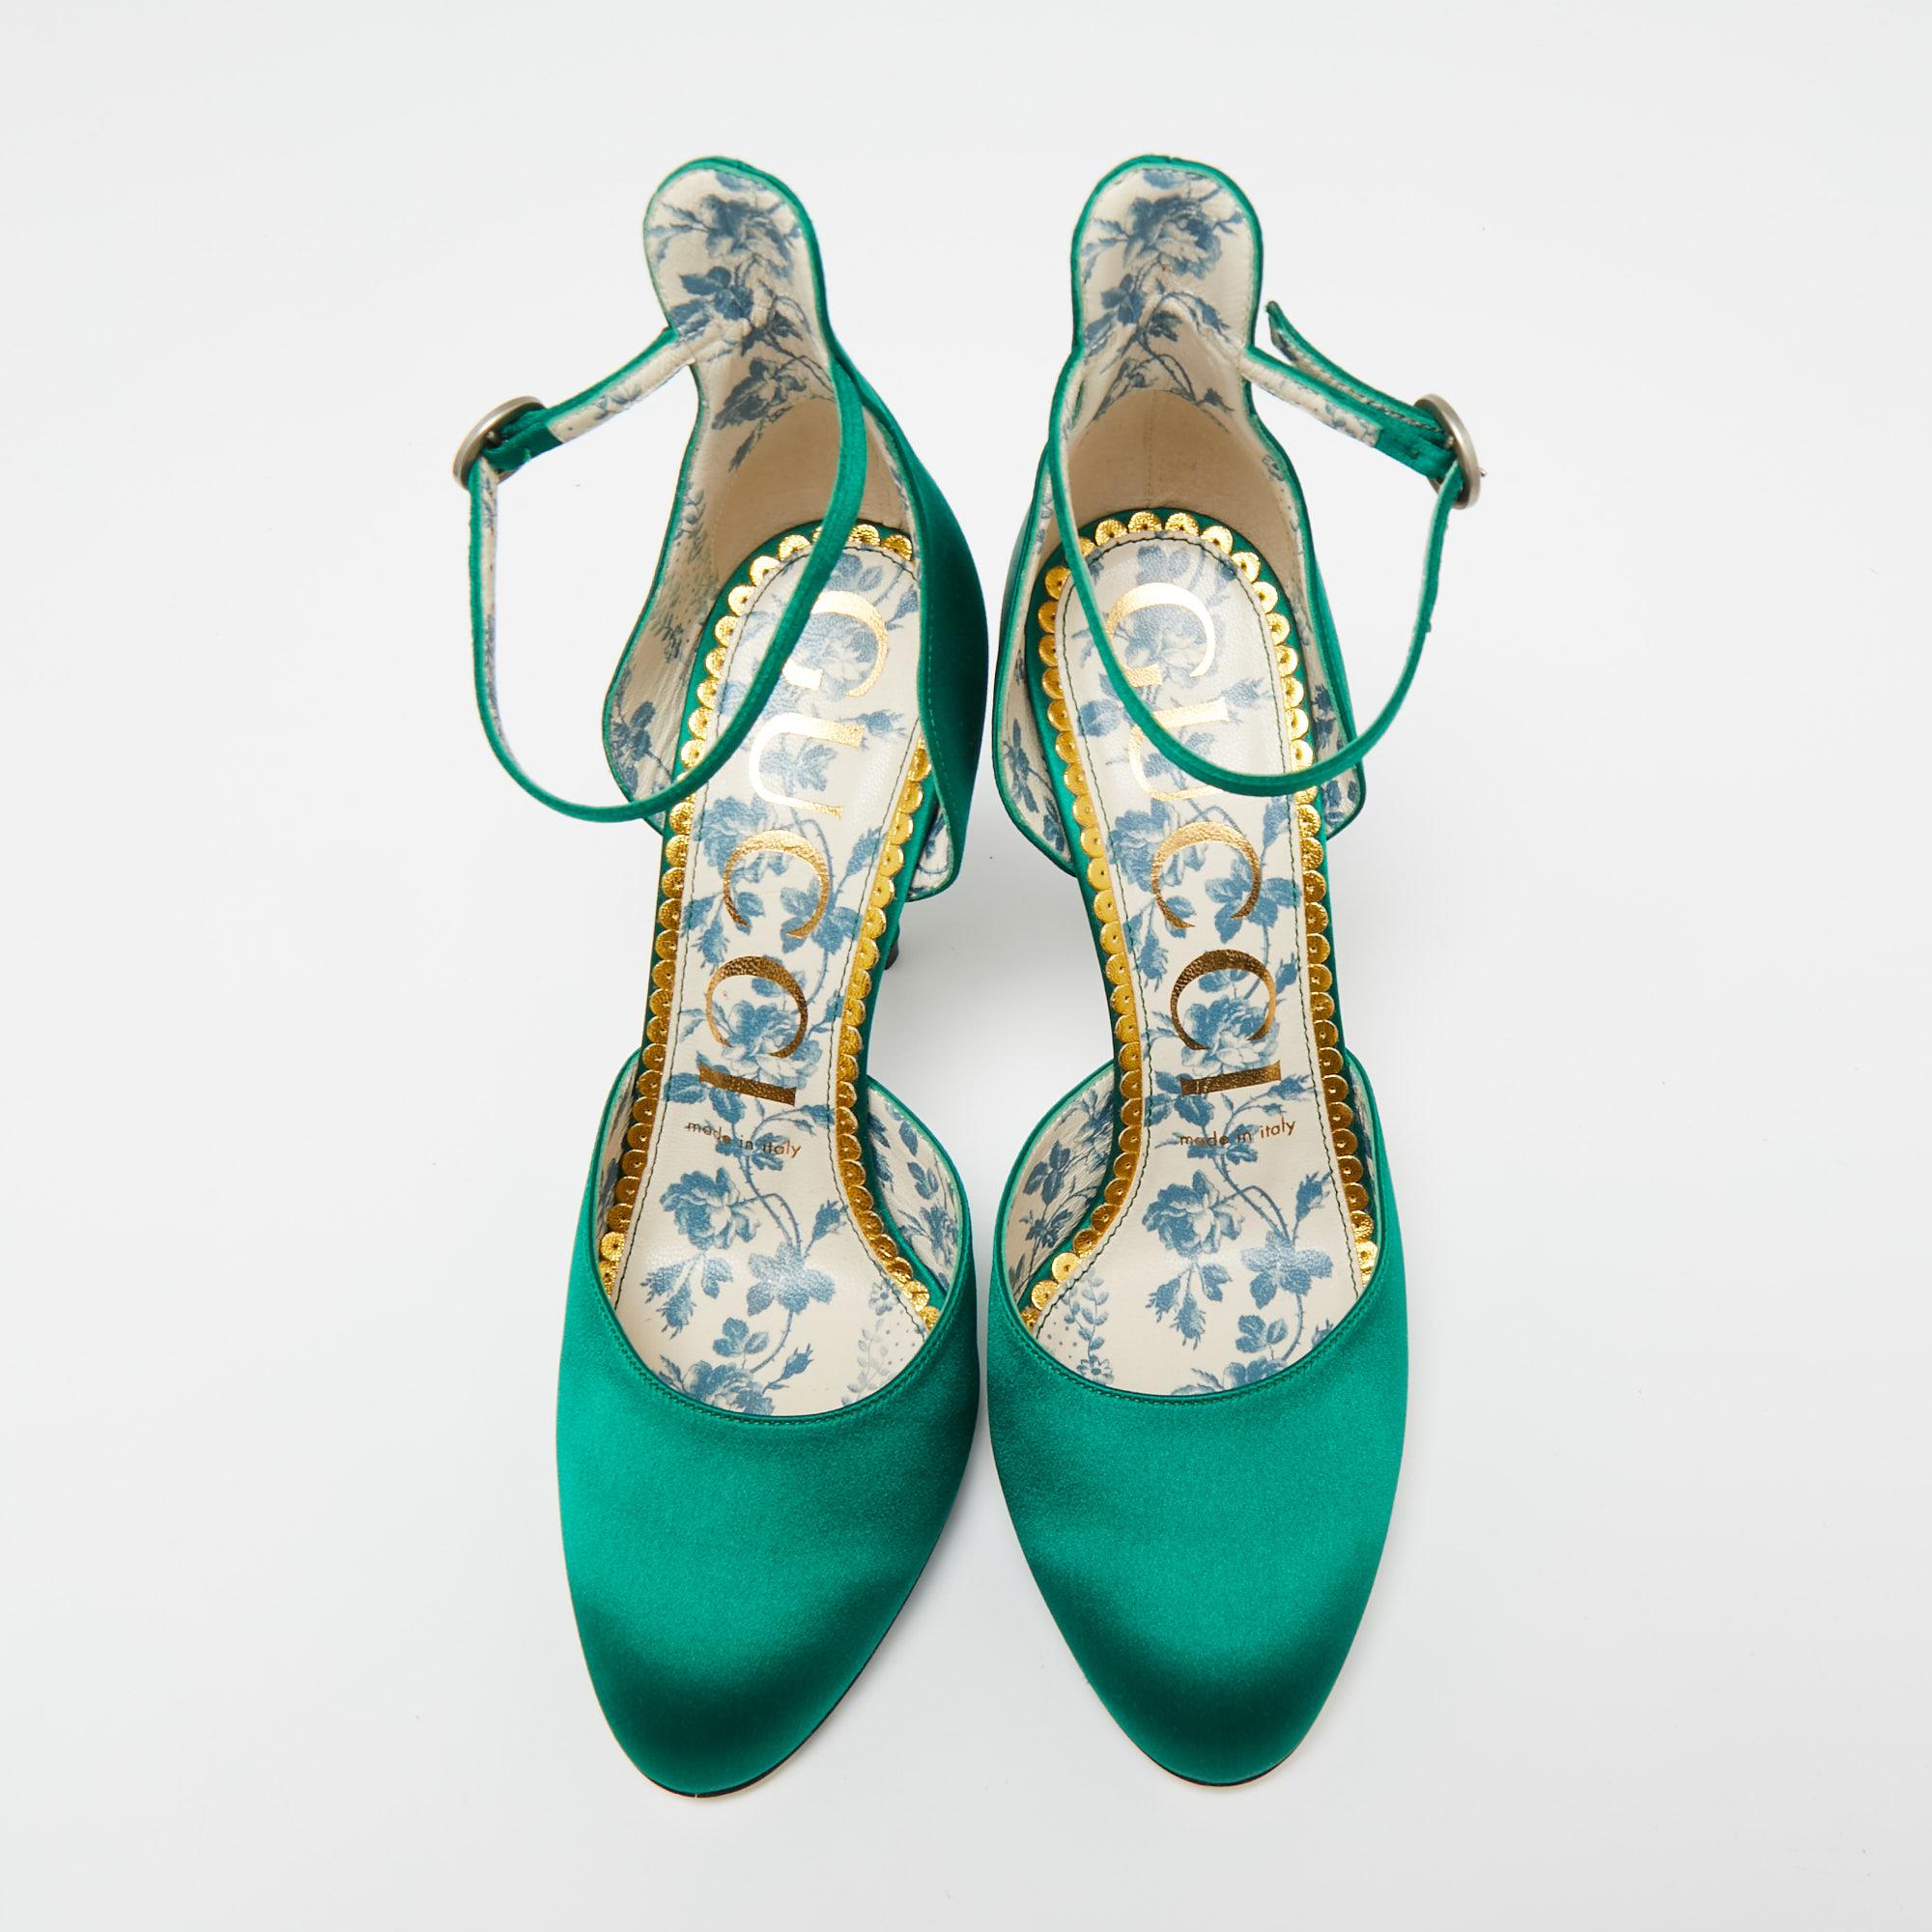 Make a grand entrance at the next party by donning these gorgeous green pumps from the house of Gucci. They are crafted from exquisite satin and have a closed-toe, buckled ankle-strap silhouette. They are beautifully supported by extended counters